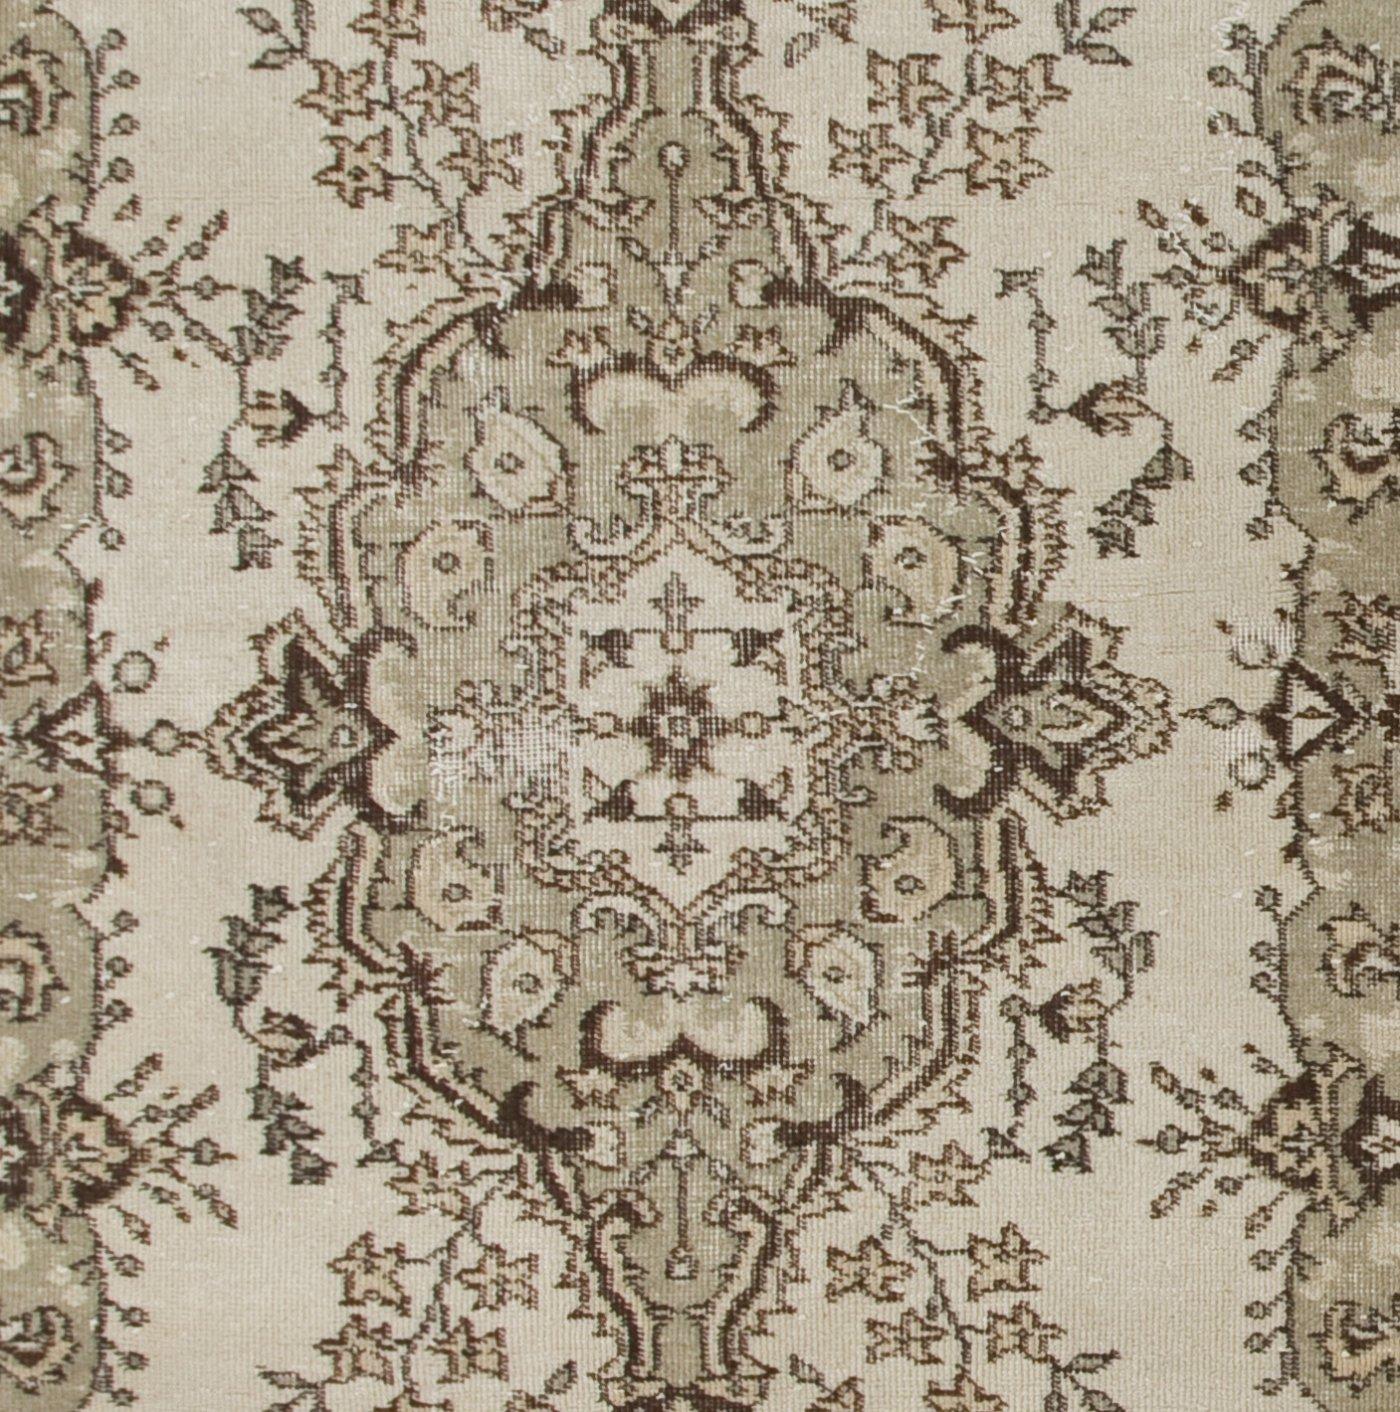 Hand-Knotted  4x7 ft Vintage Turkish Accent Rug in Beige. Sun Faded Handmade Carpet